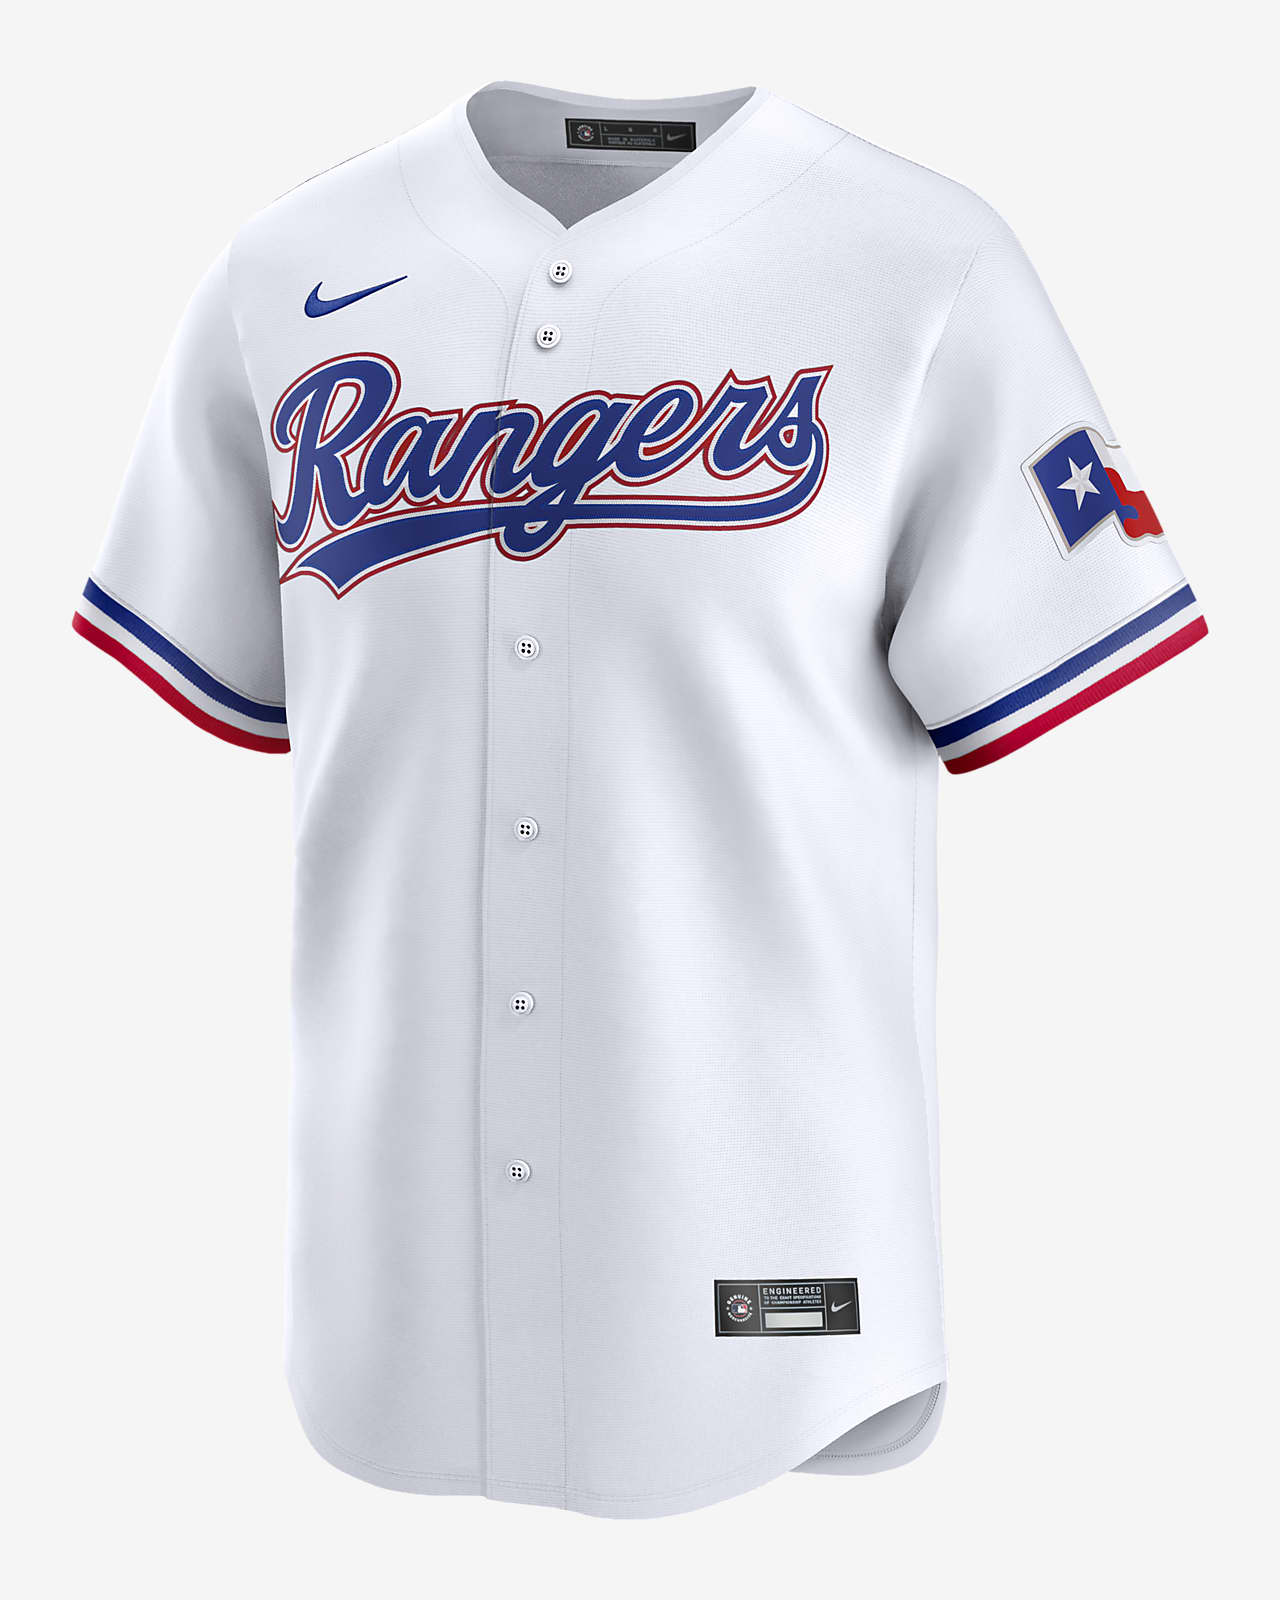 Corey Seager Texas Rangers Men's Nike Dri-FIT ADV MLB Limited Jersey